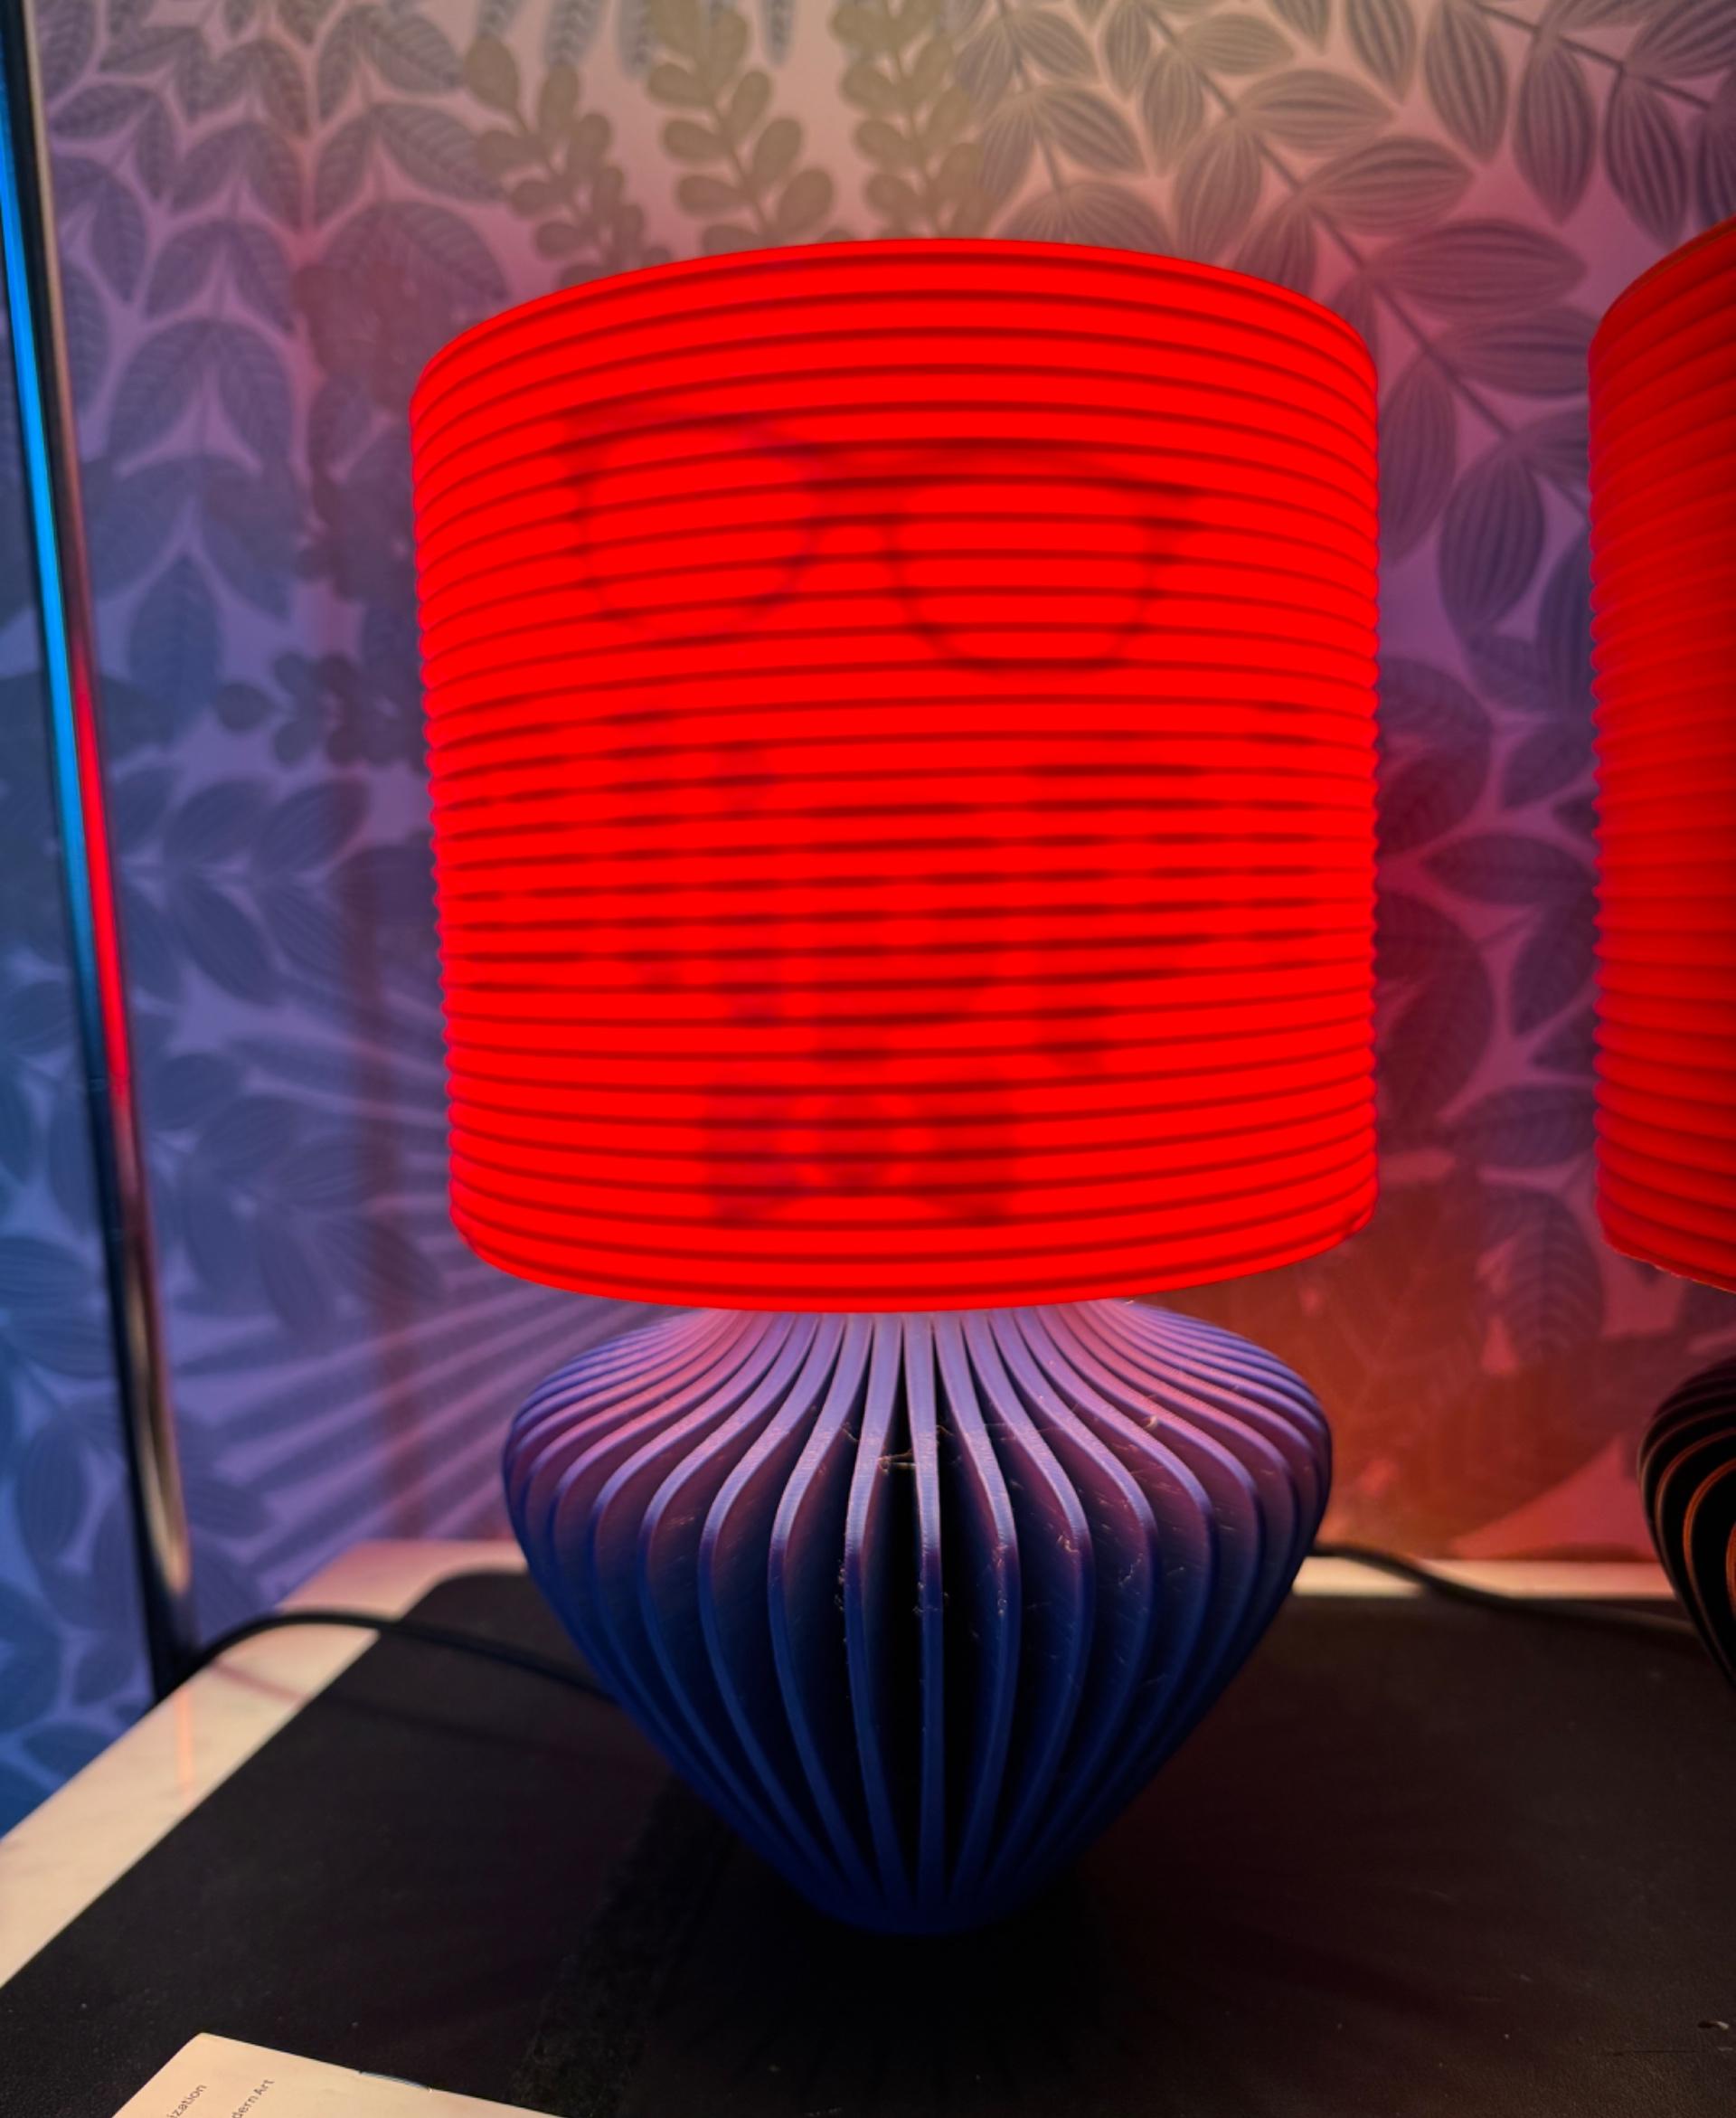 Cleo Lamp - For the kiddos.  Design only visible when light is on.

I love this lamp.  And your vase.  The light pattern created on a table is beautiful.  Nice work. - 3d model